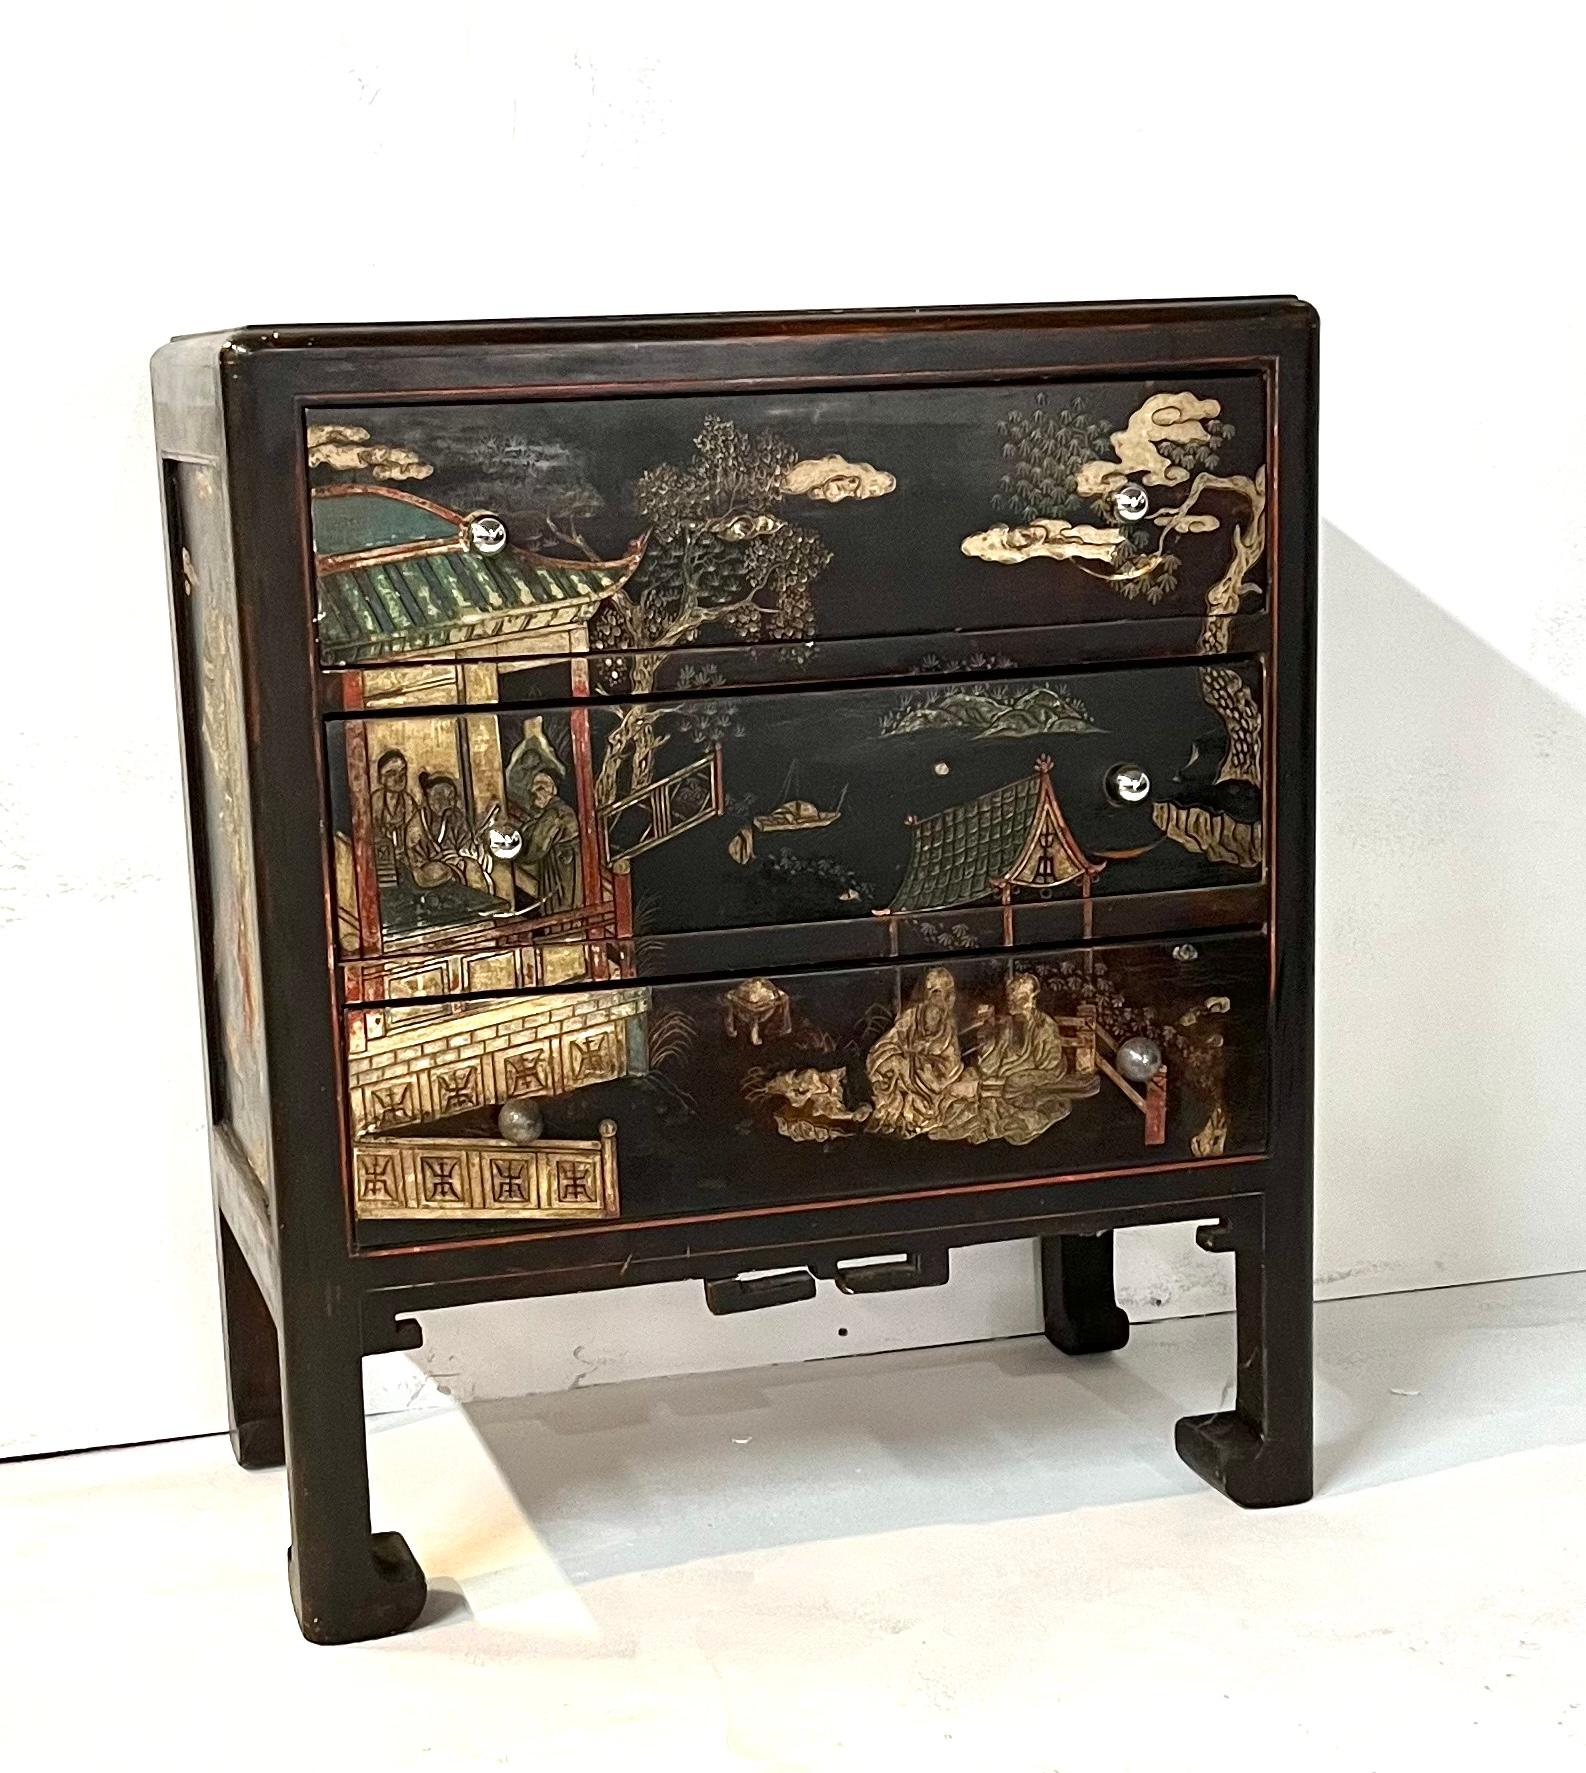 Wood Chinese Chest of Drawers Lacqua Decorated Animated Llandscape and Characters